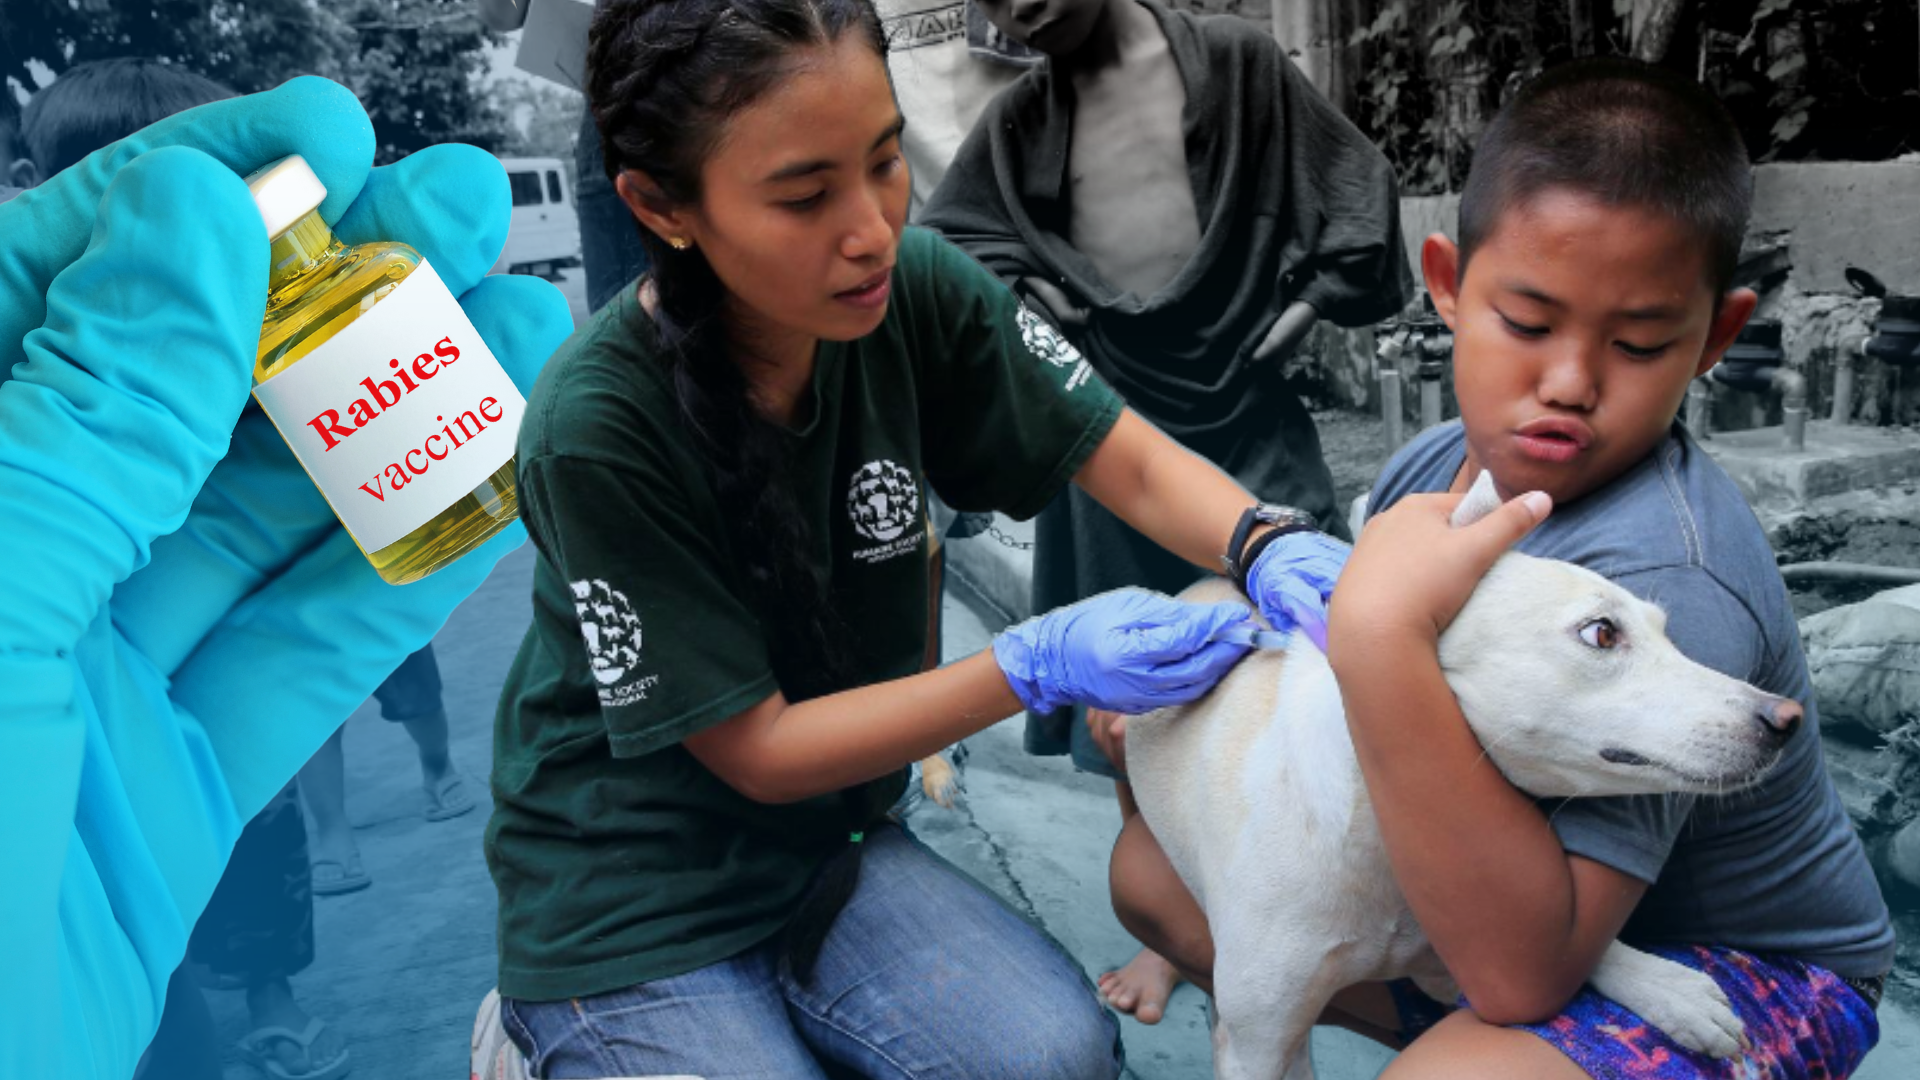 The Department of Health (DOH) urged the public on Saturday to be extra cautious against the rabies virus, as it is one of the most common health concerns during the dry season.